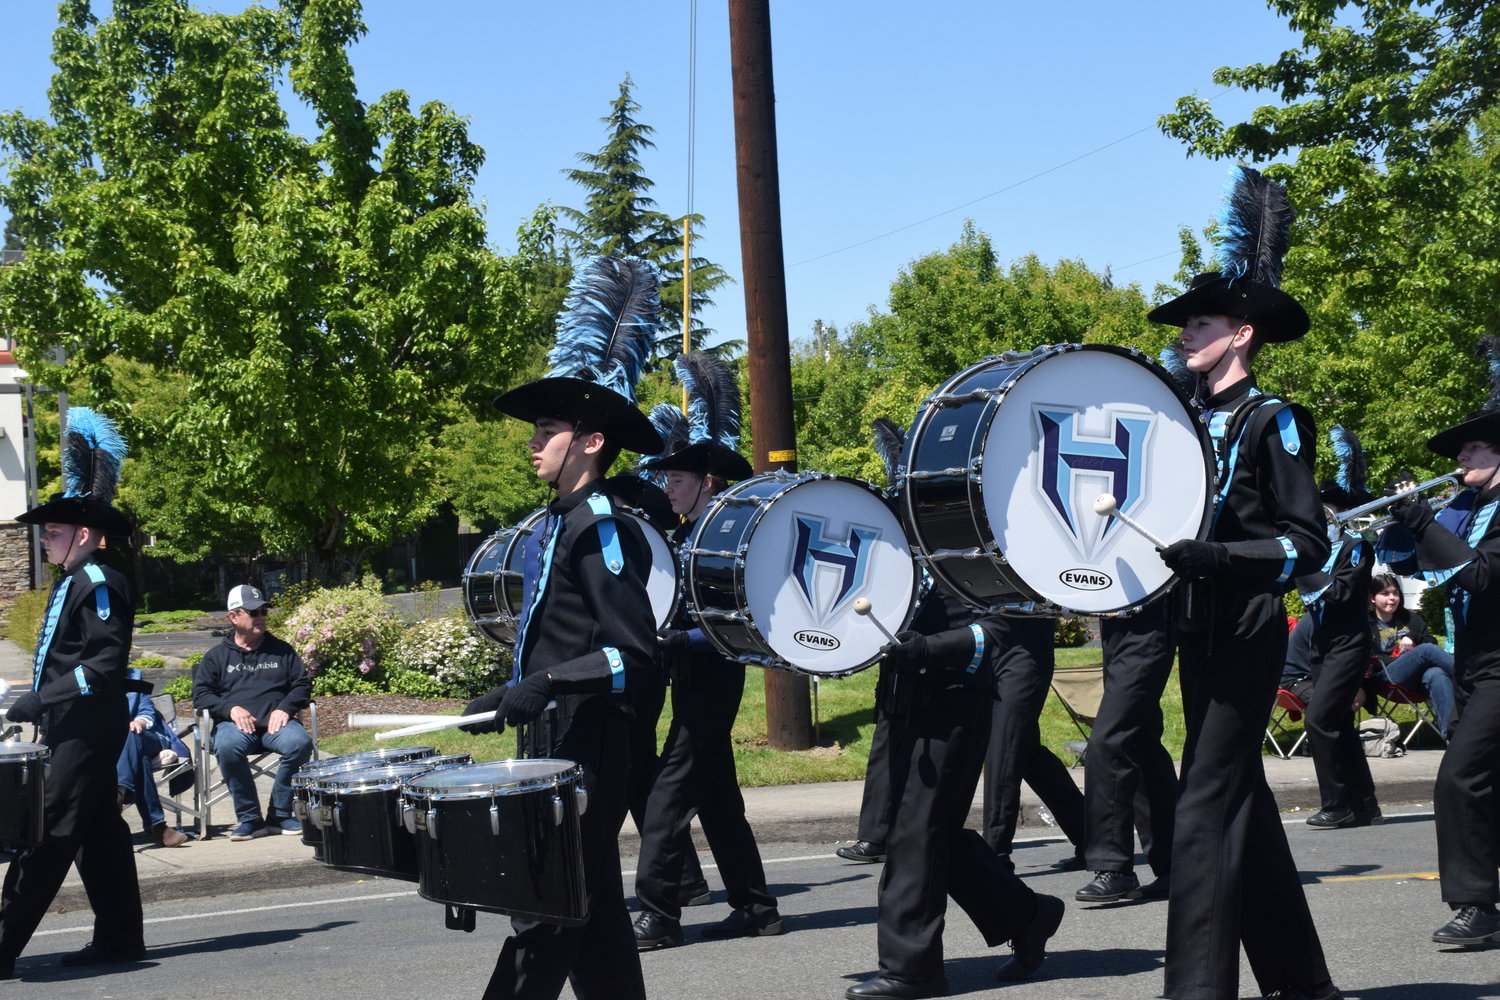 Hockinson High School’s marching band parades down Hazel Dell Avenue during the 2022 Parade of Bands on May 21.